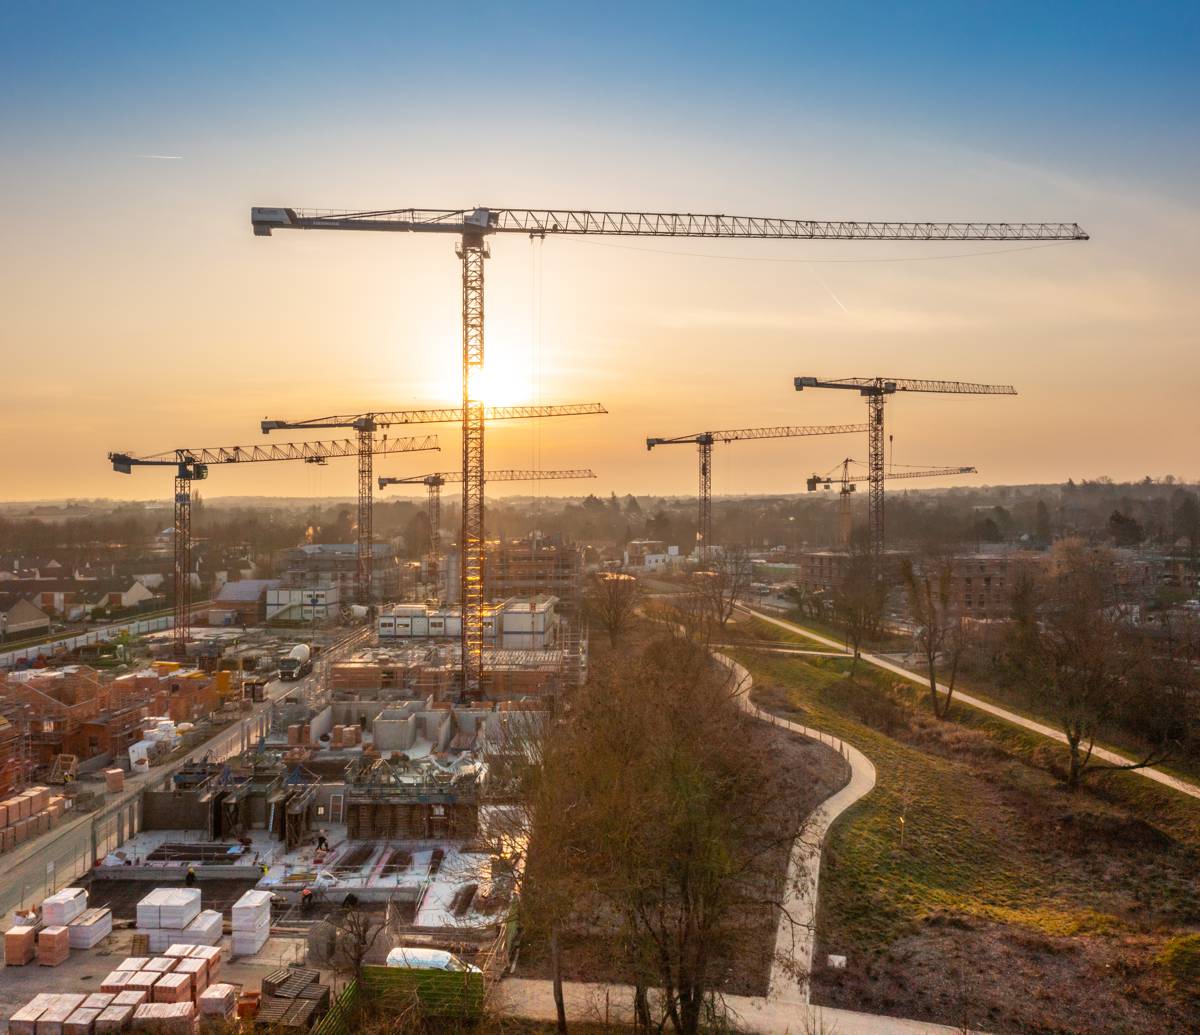 Liebherr Tower Cranes building an eco-friendly District in France